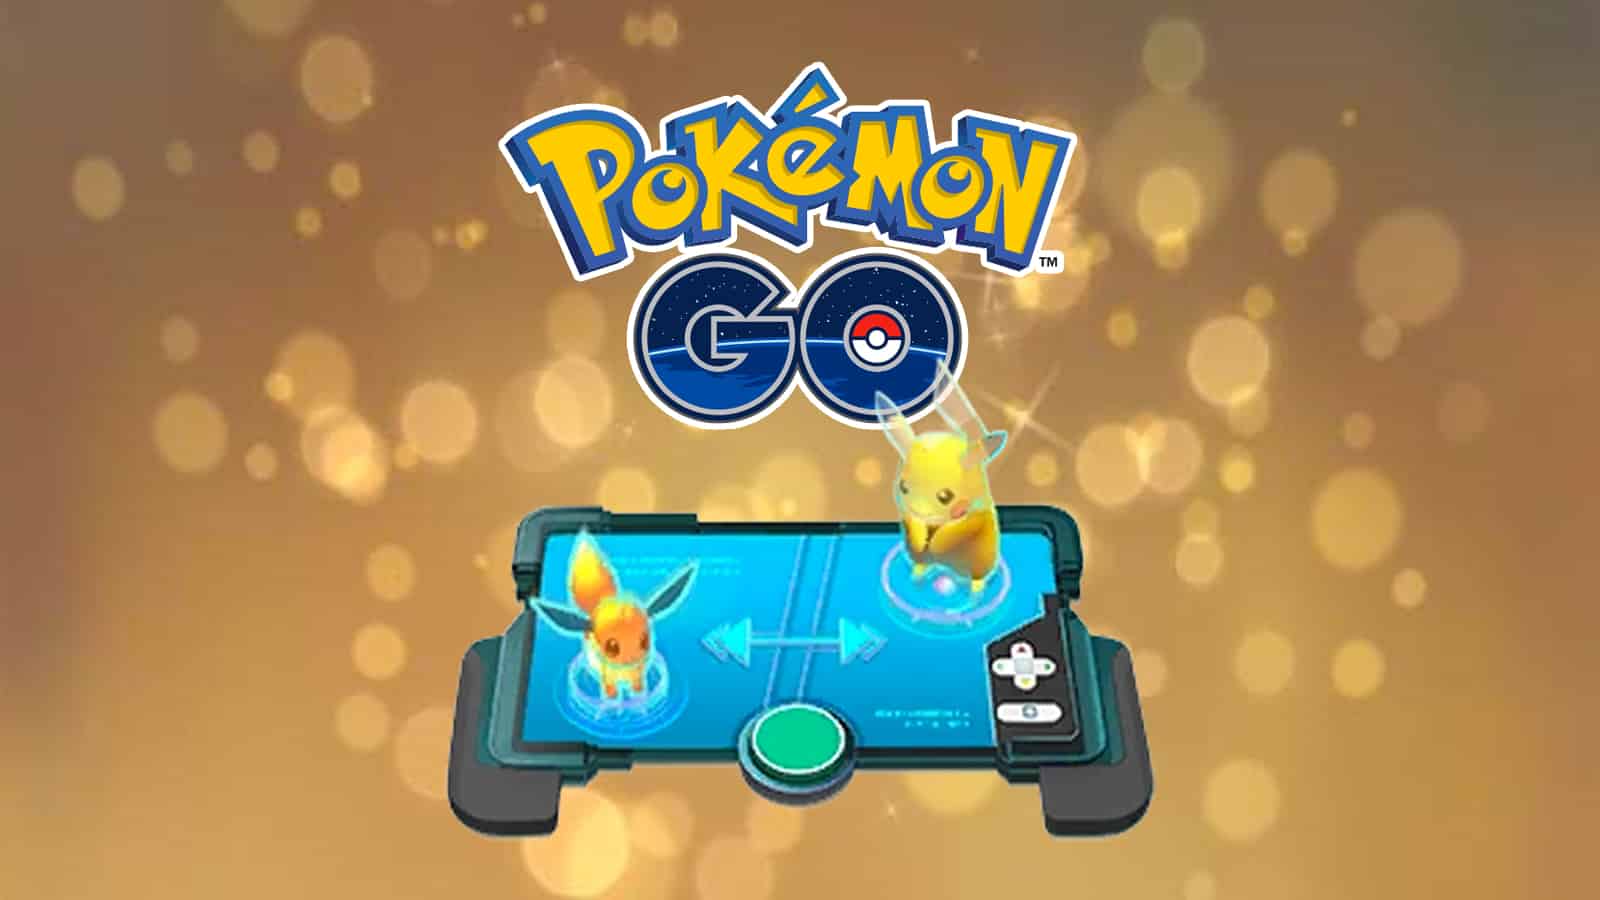 A Pokemon Go trading symbol as players can't trade